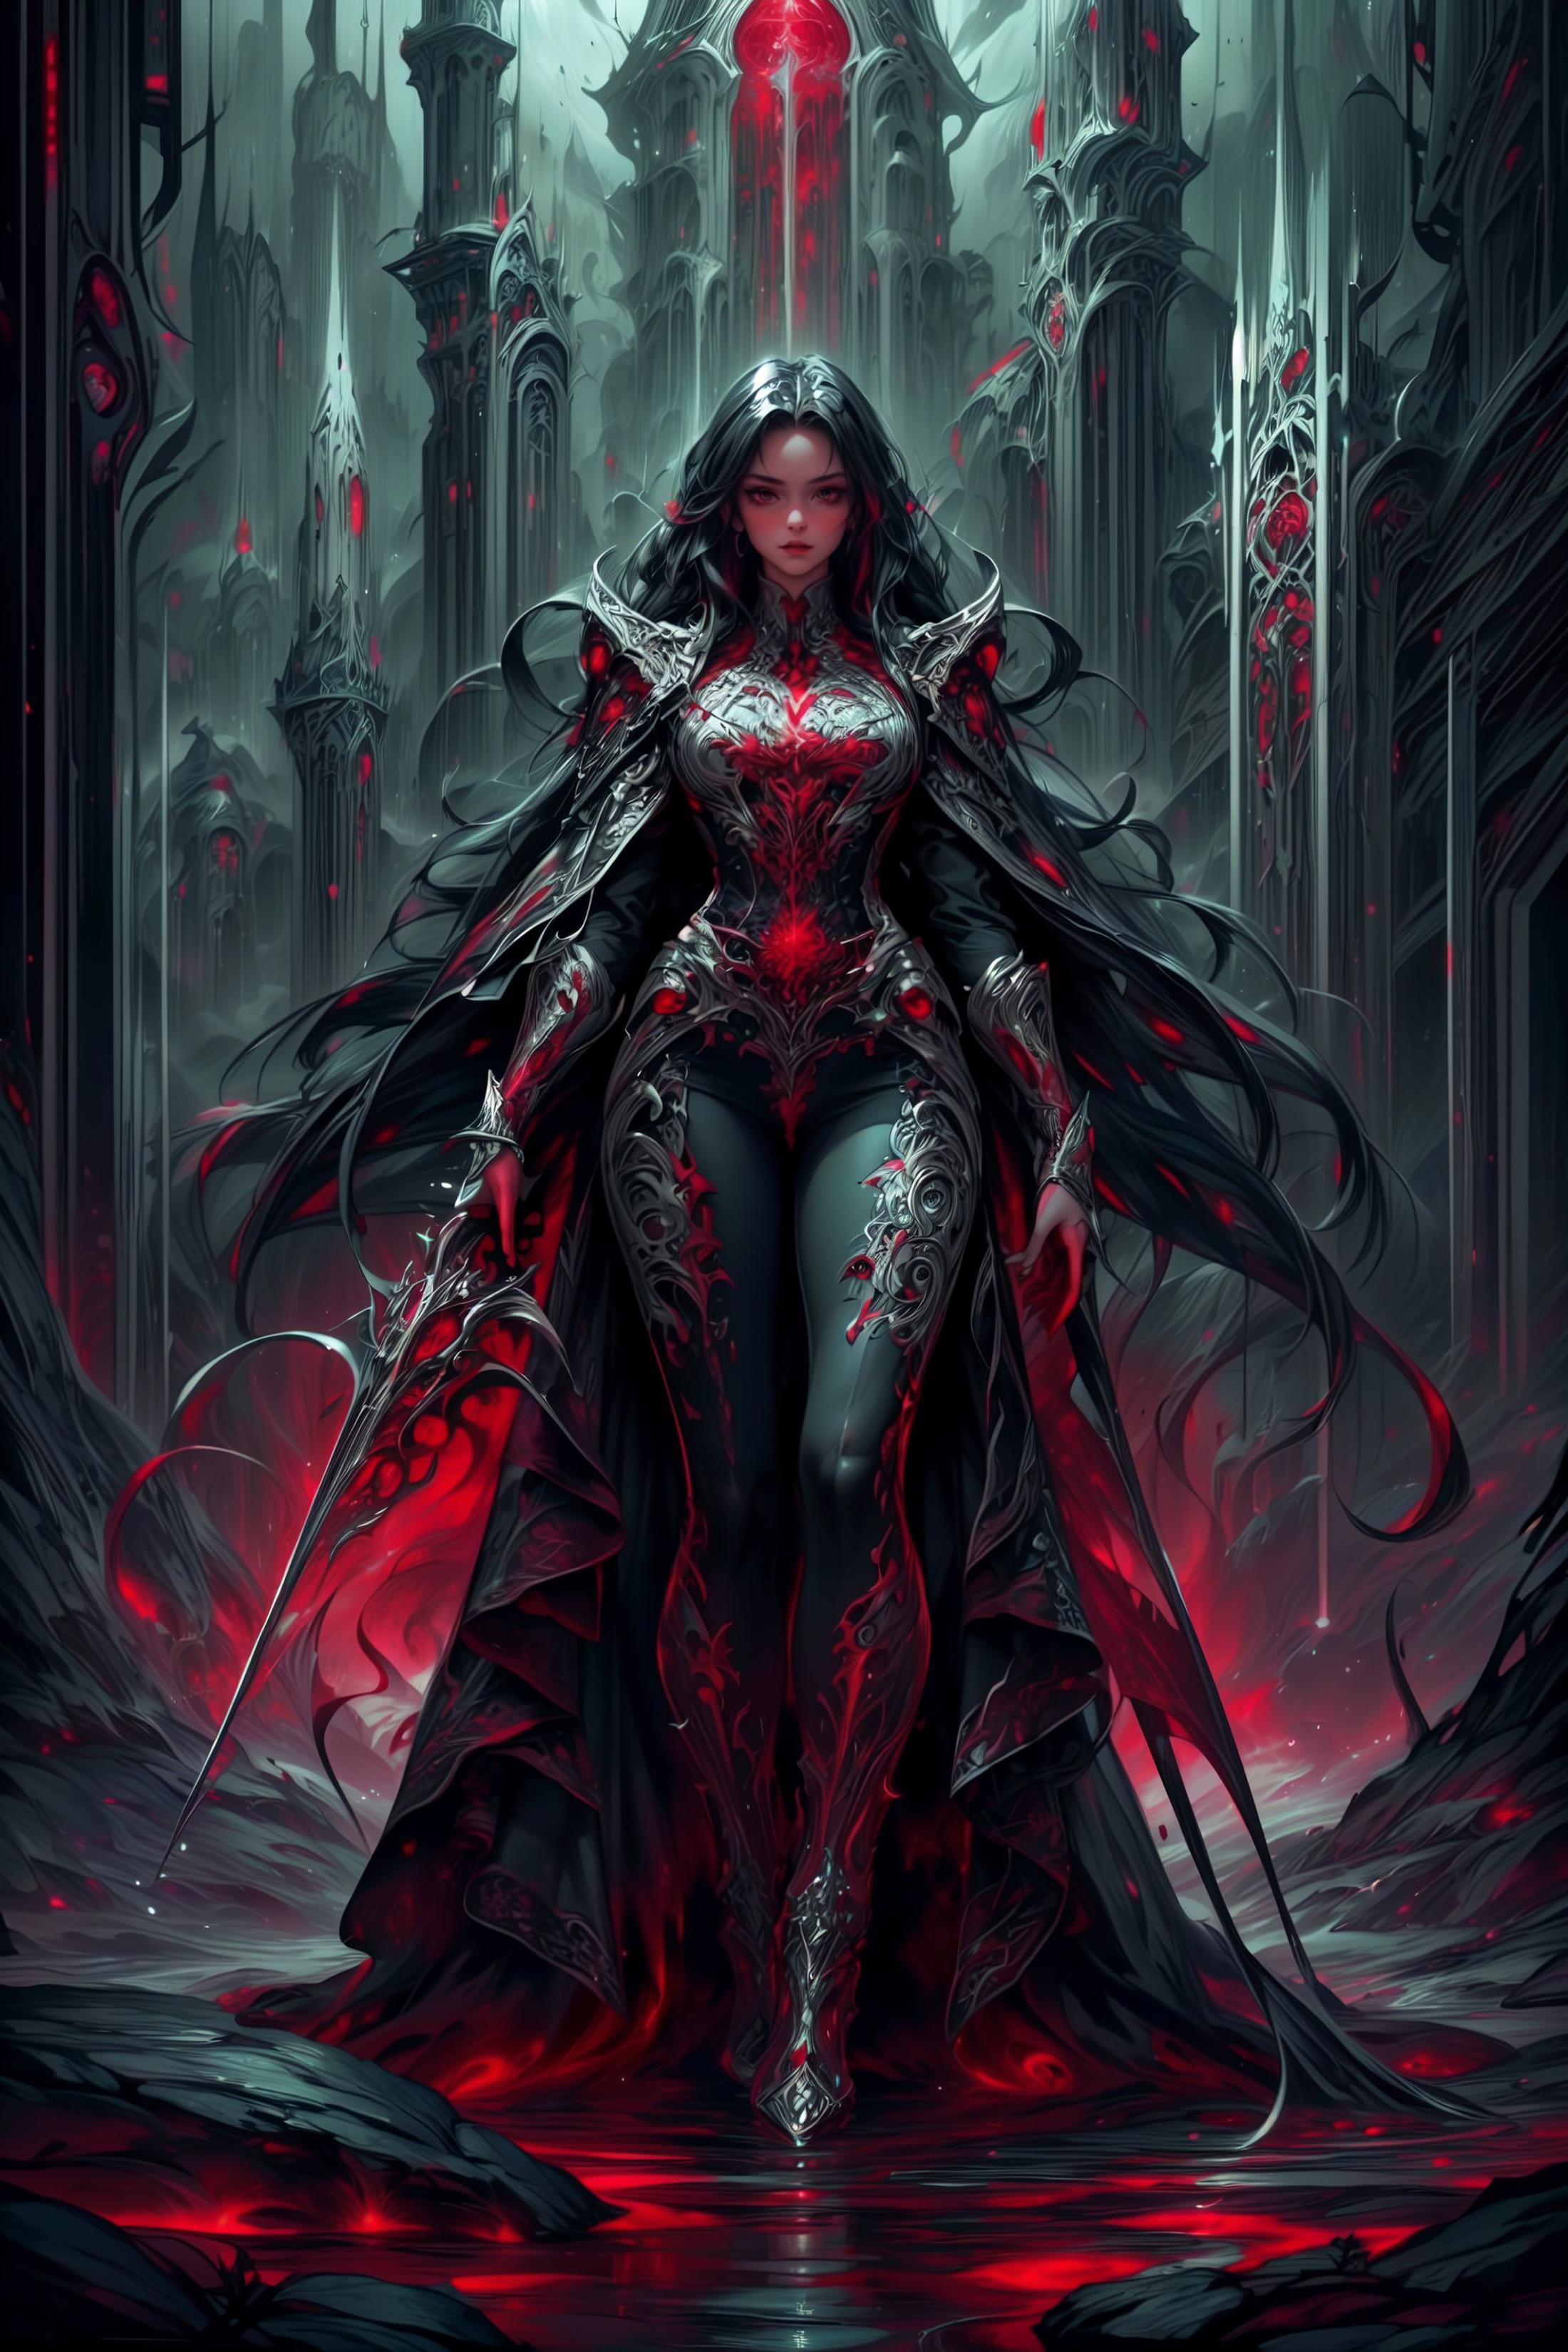 A dark and mysterious fantasy artwork featuring a woman in a black dress with a sword, set against a dramatic backdrop.